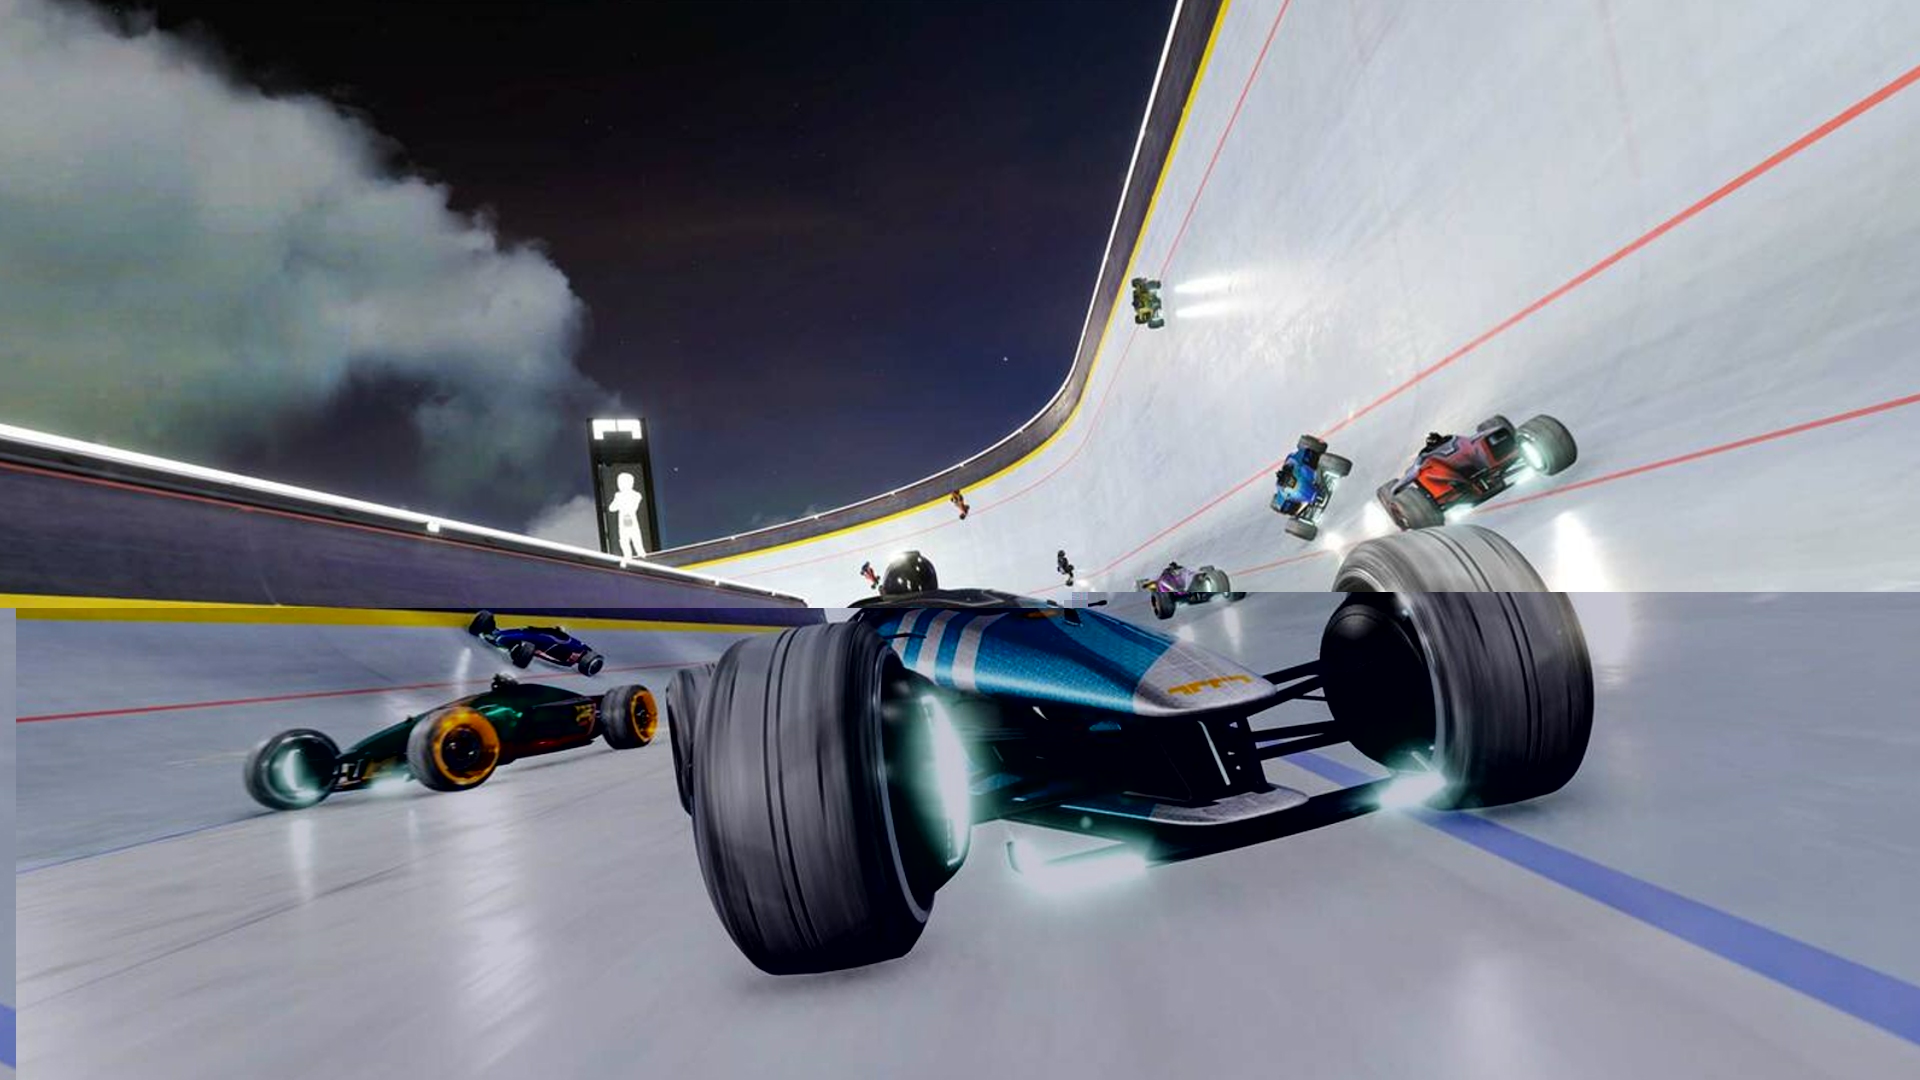 Best Racing Games: All the top kart, sim and arcade racers